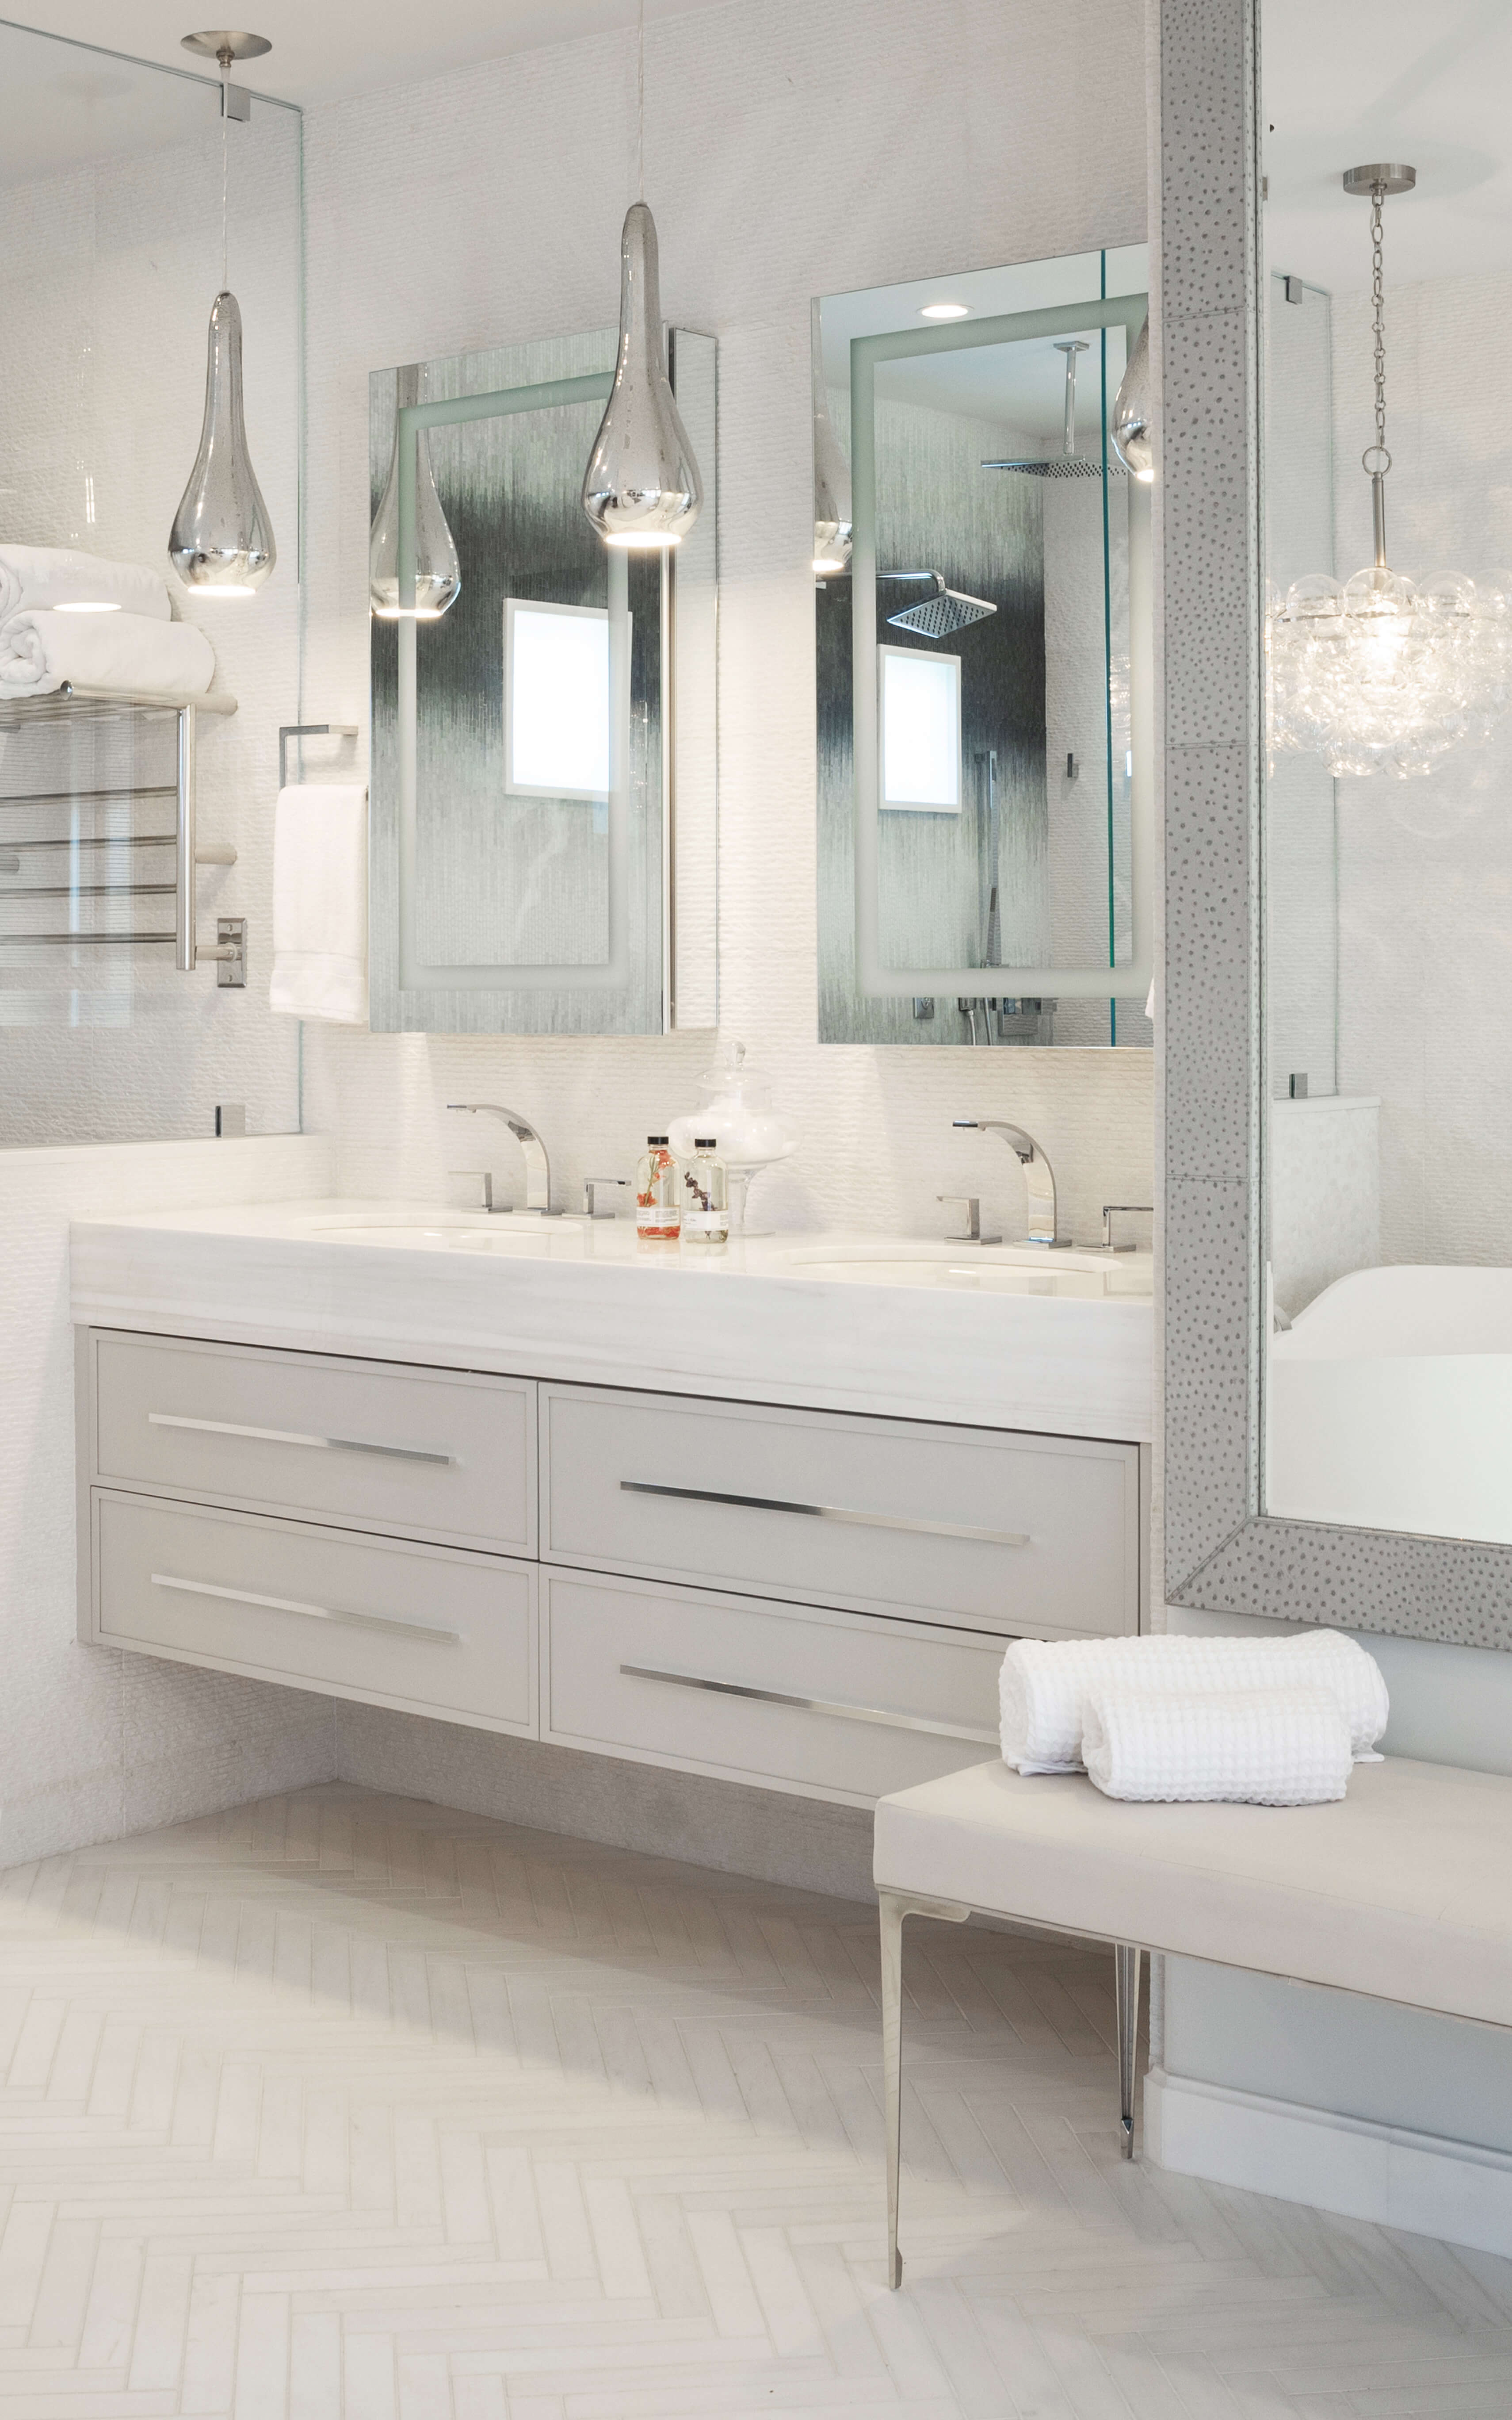 A glamourous master bathroom suite with a floating vanity with very thin profiles on the flat panel door. The wall hug vanity is shown with a soft, light gray painted finish, long satin nickel hardware pulls, and a thick quartz countertop.